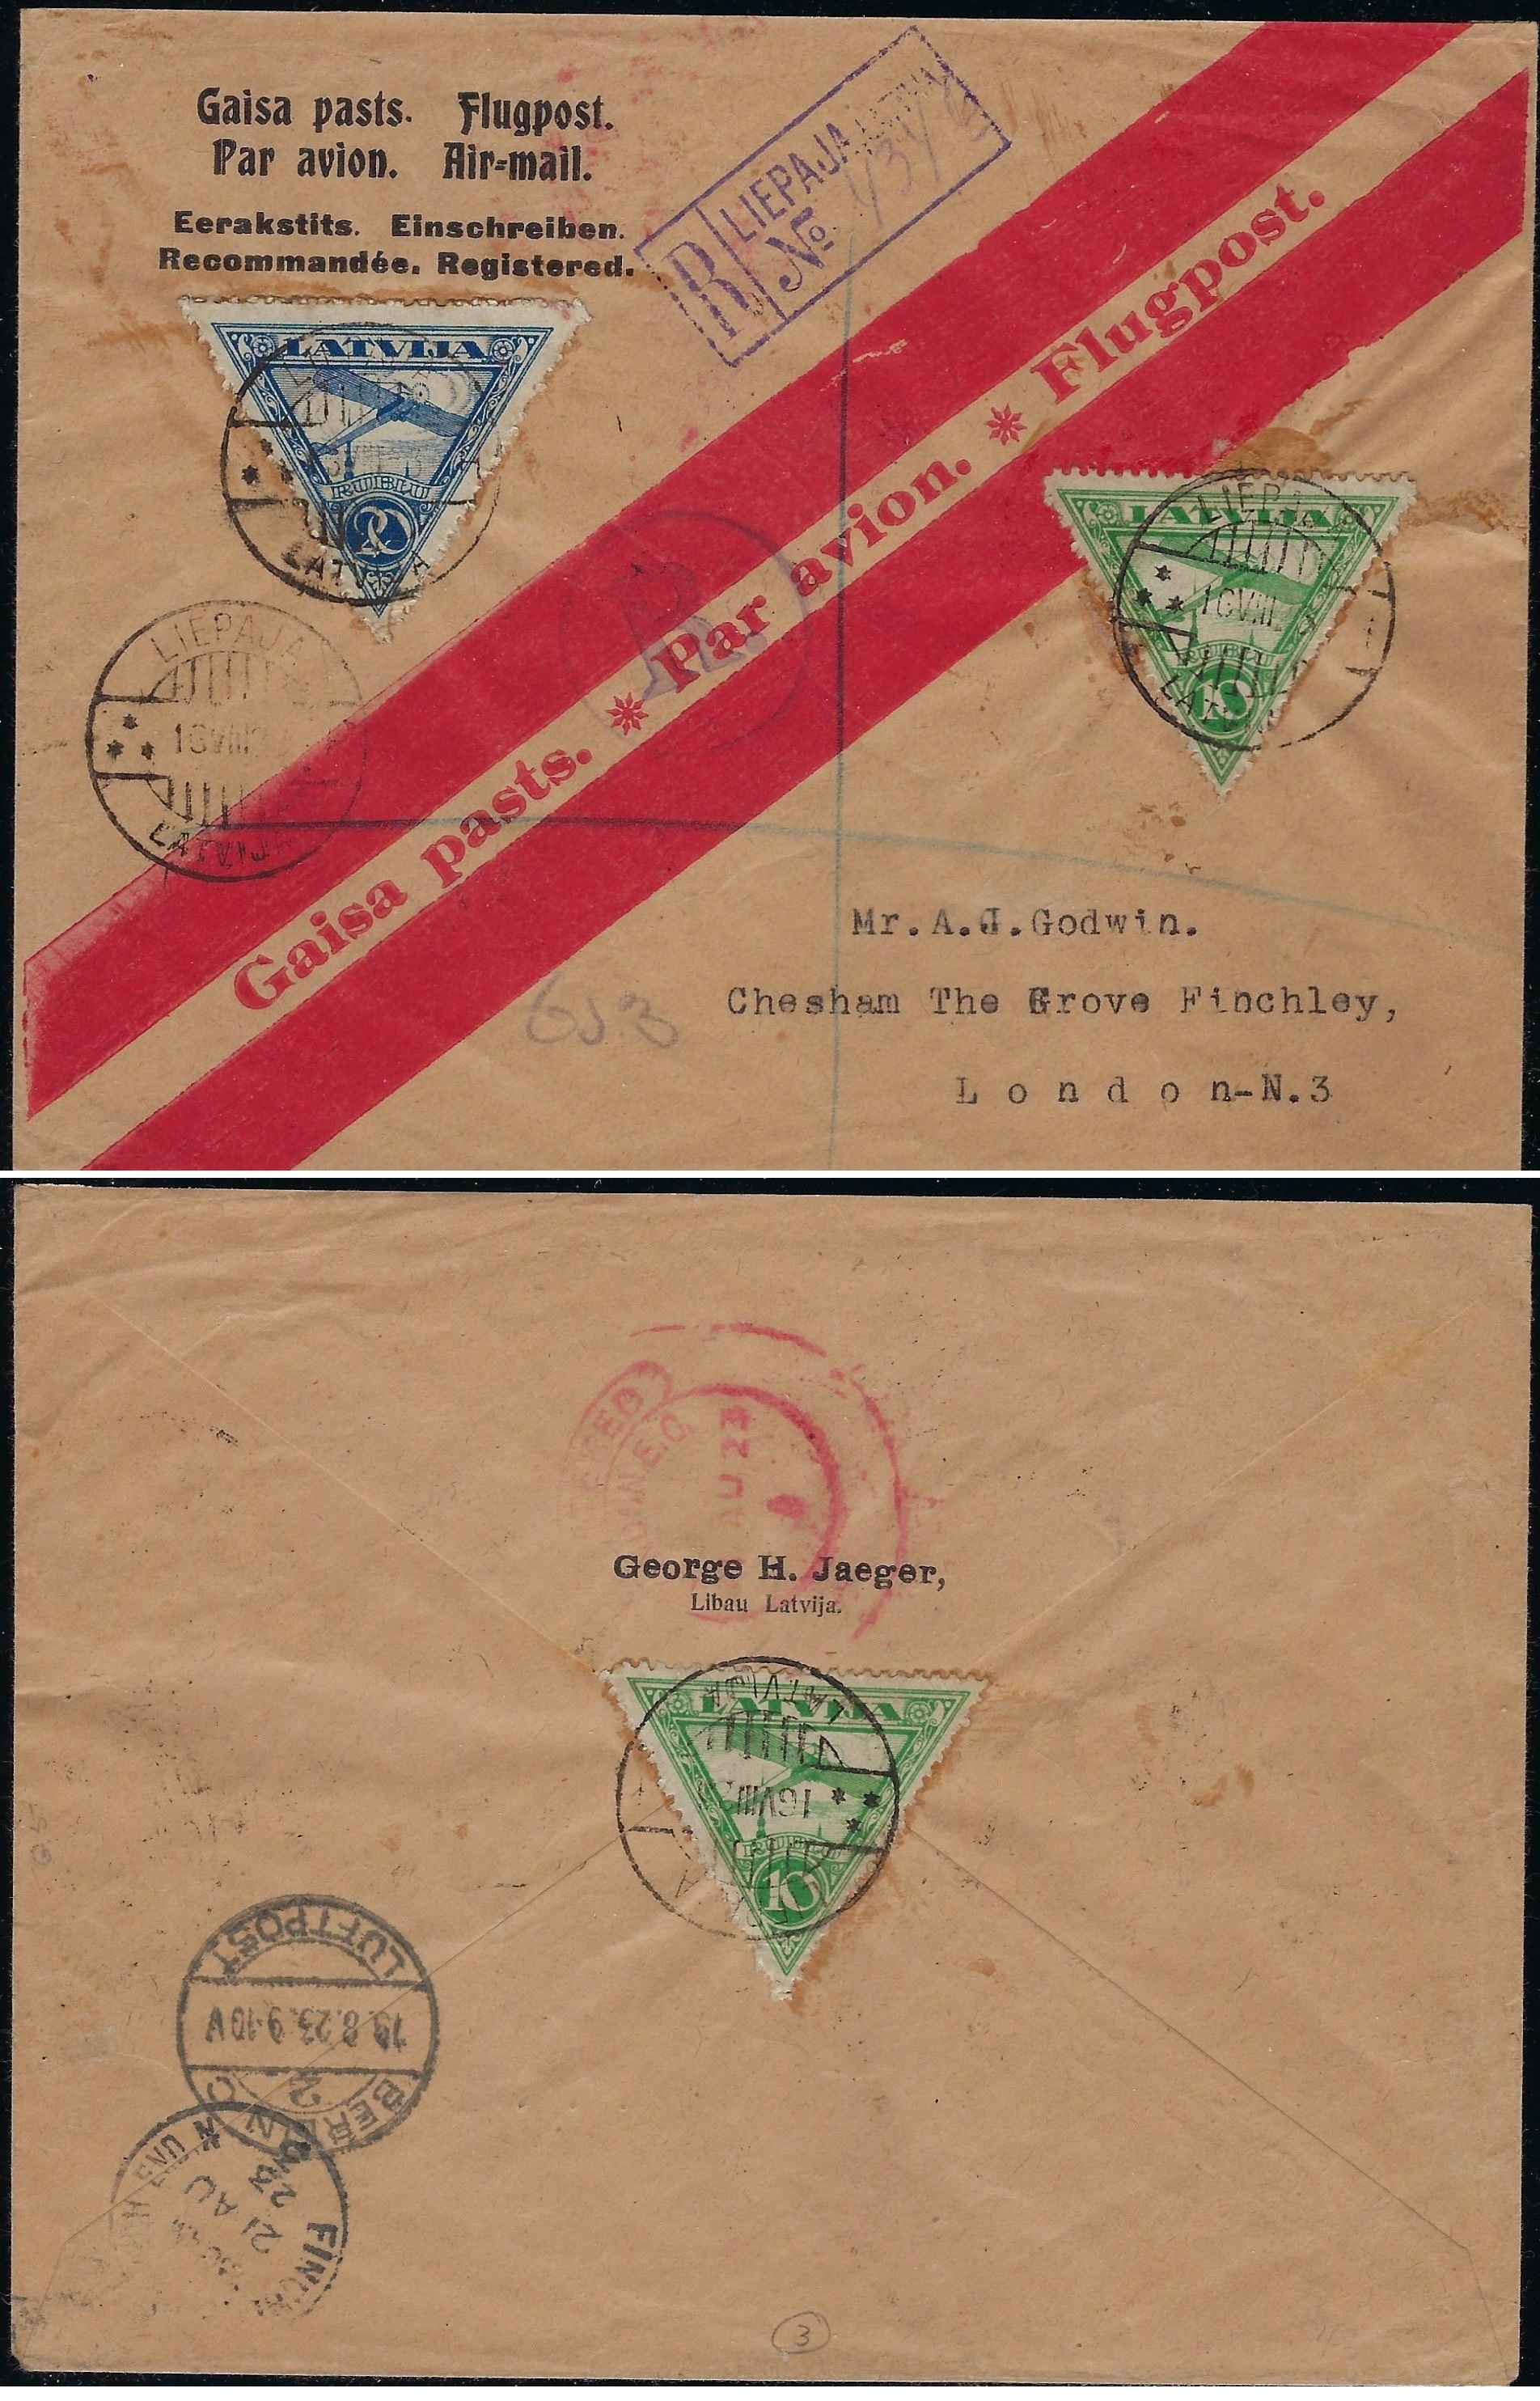 Baltic States Specialized AIR MAIL Stamps Scott C1-2 